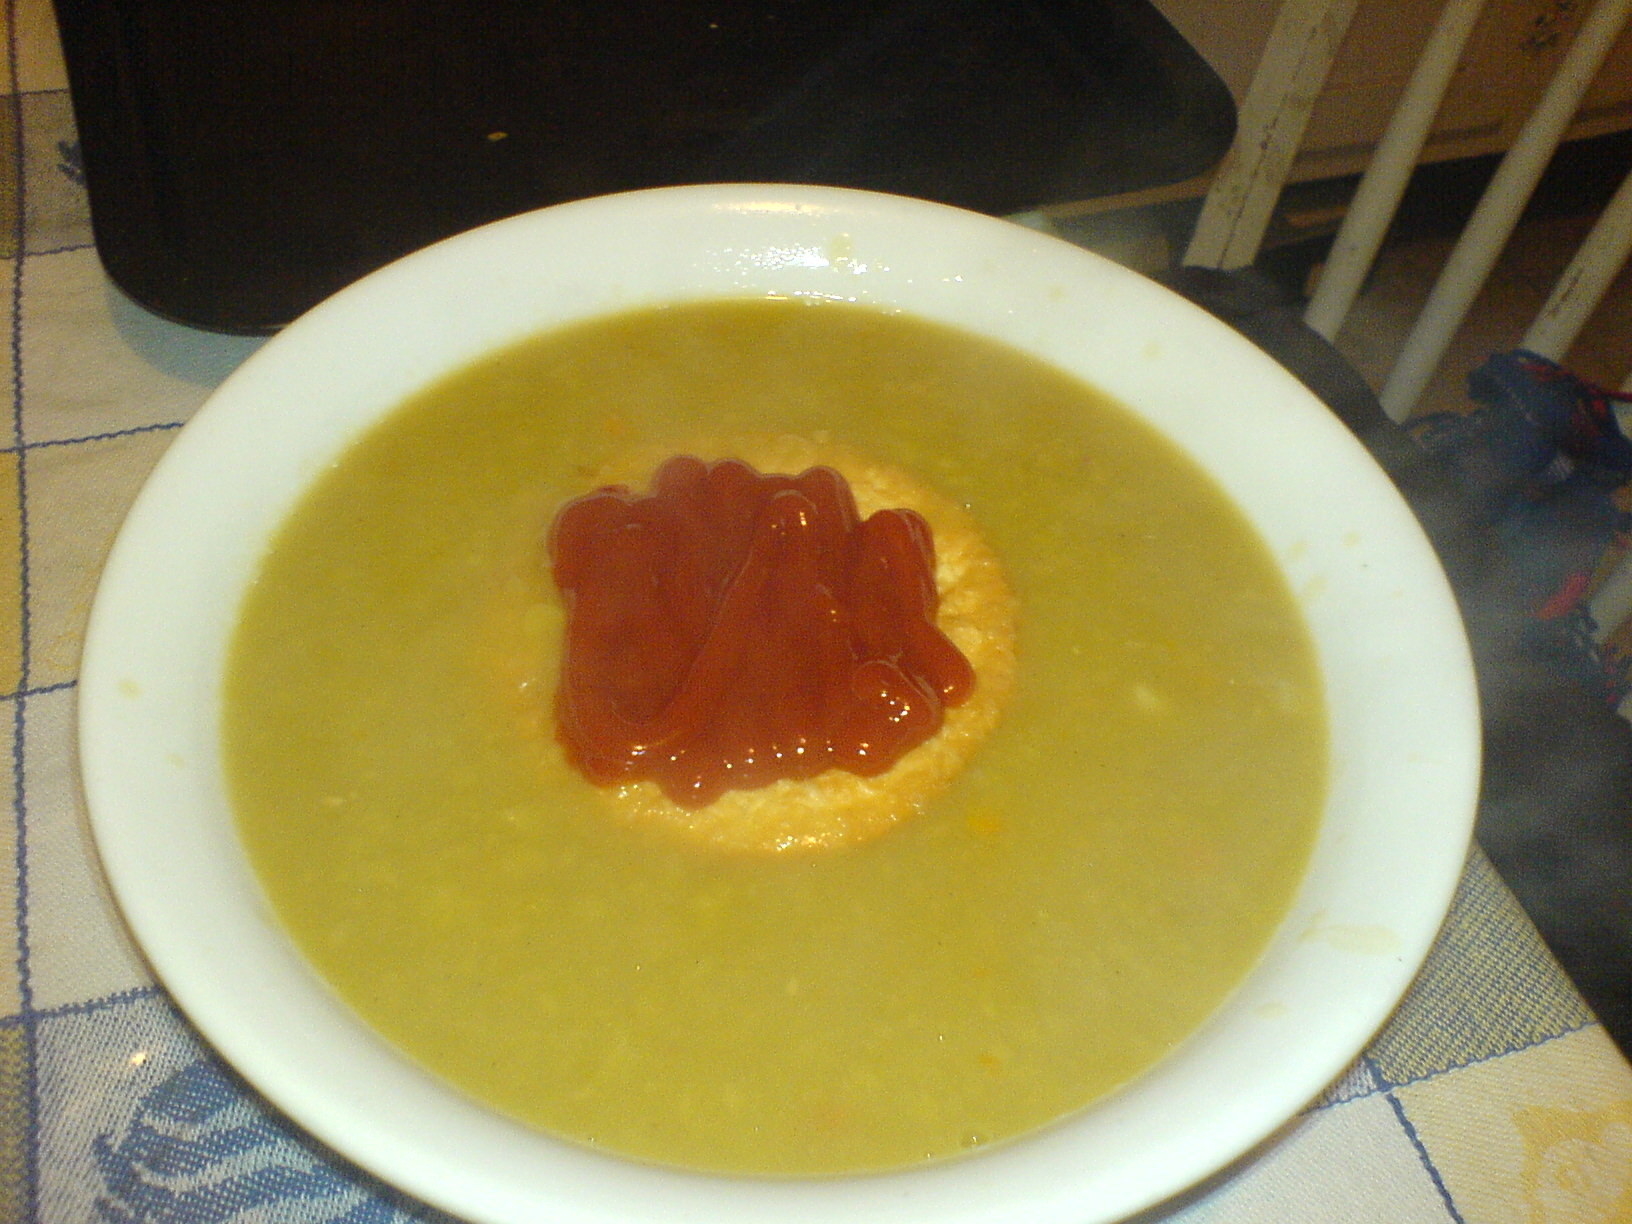 A plate filled with pea soup with a submerged meat pie with tomato sauce on top